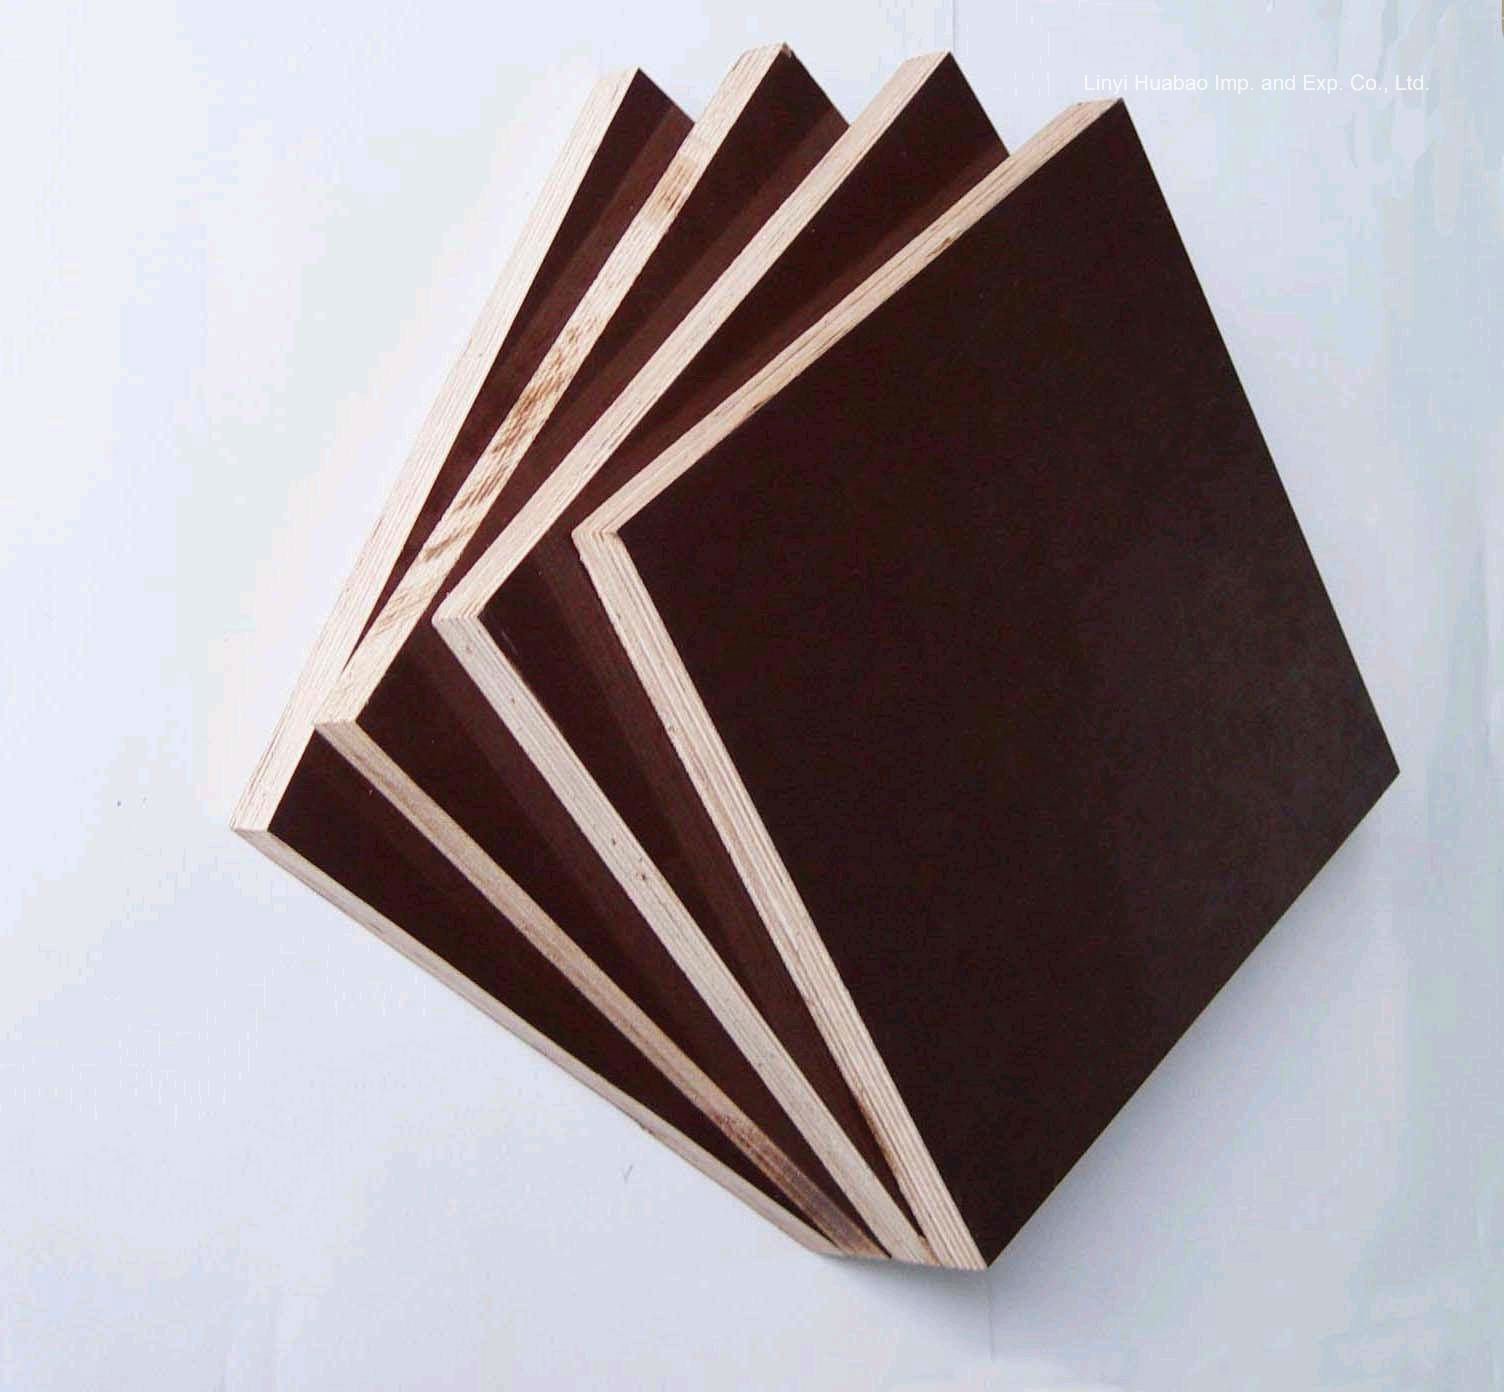 Film Faced Plywood-18mm/21mm Used for Constructions